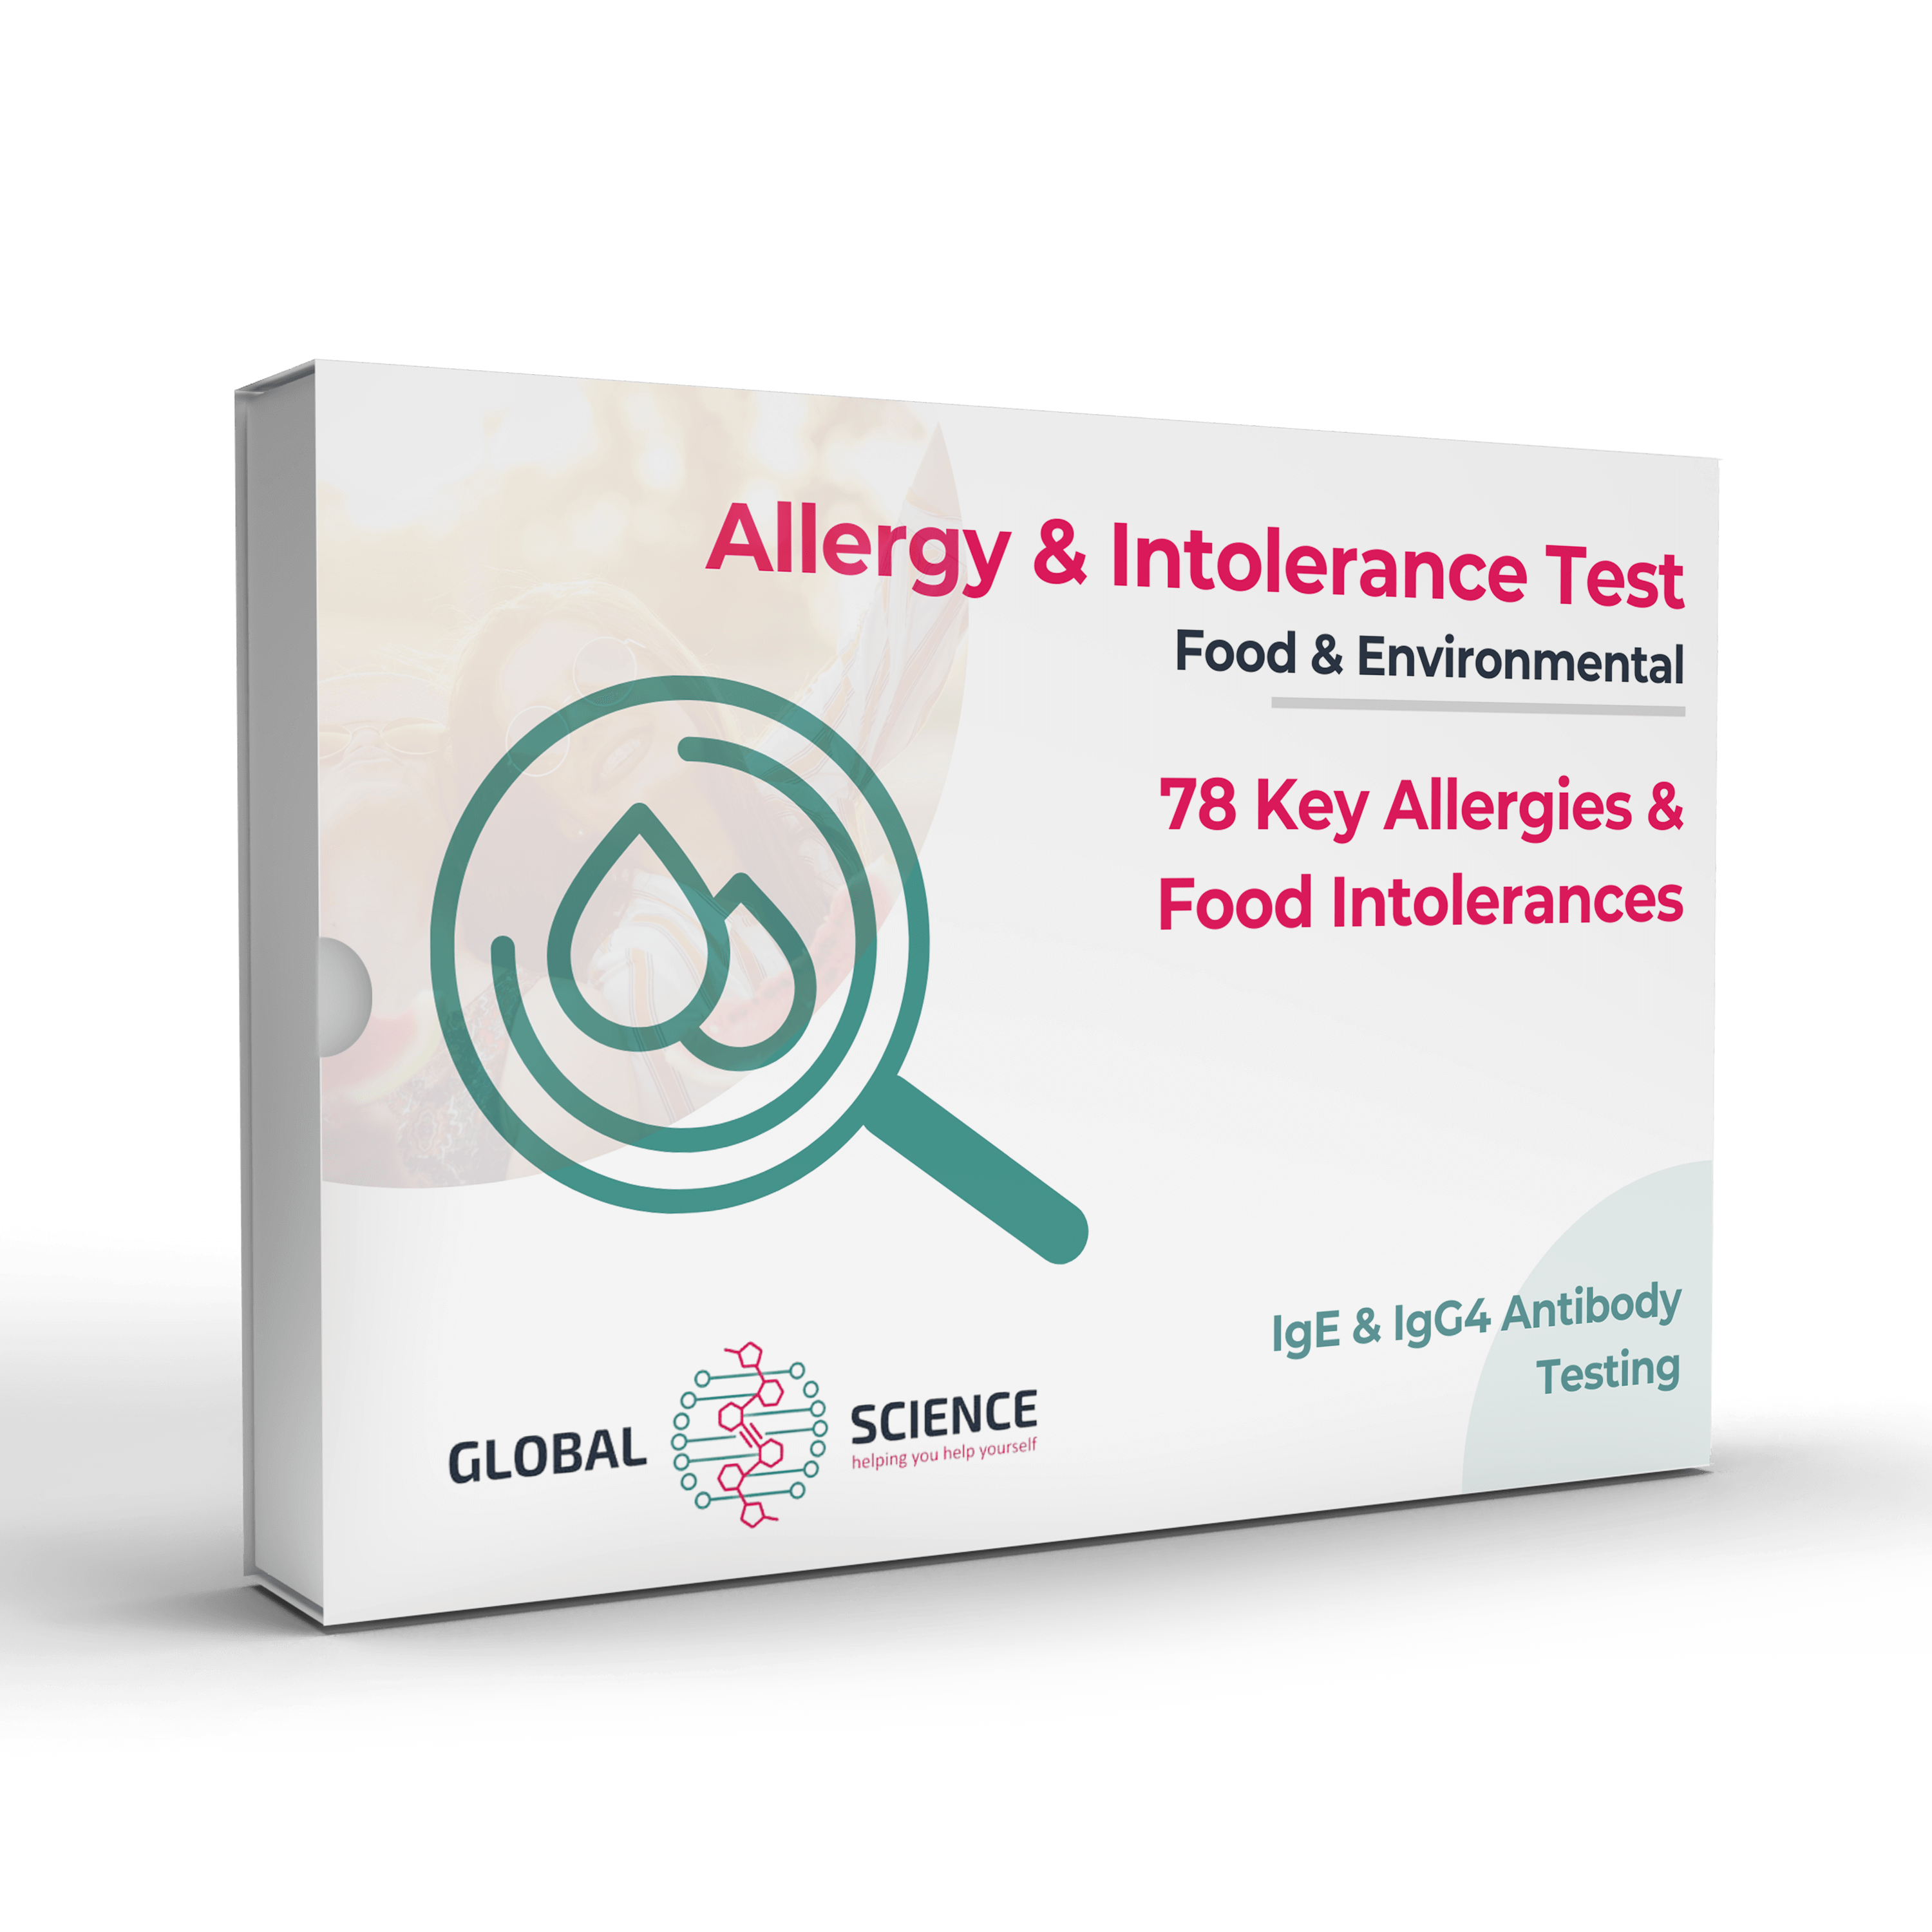 TMI TMA Allergy and Intolerance Test - How intolerance testing works